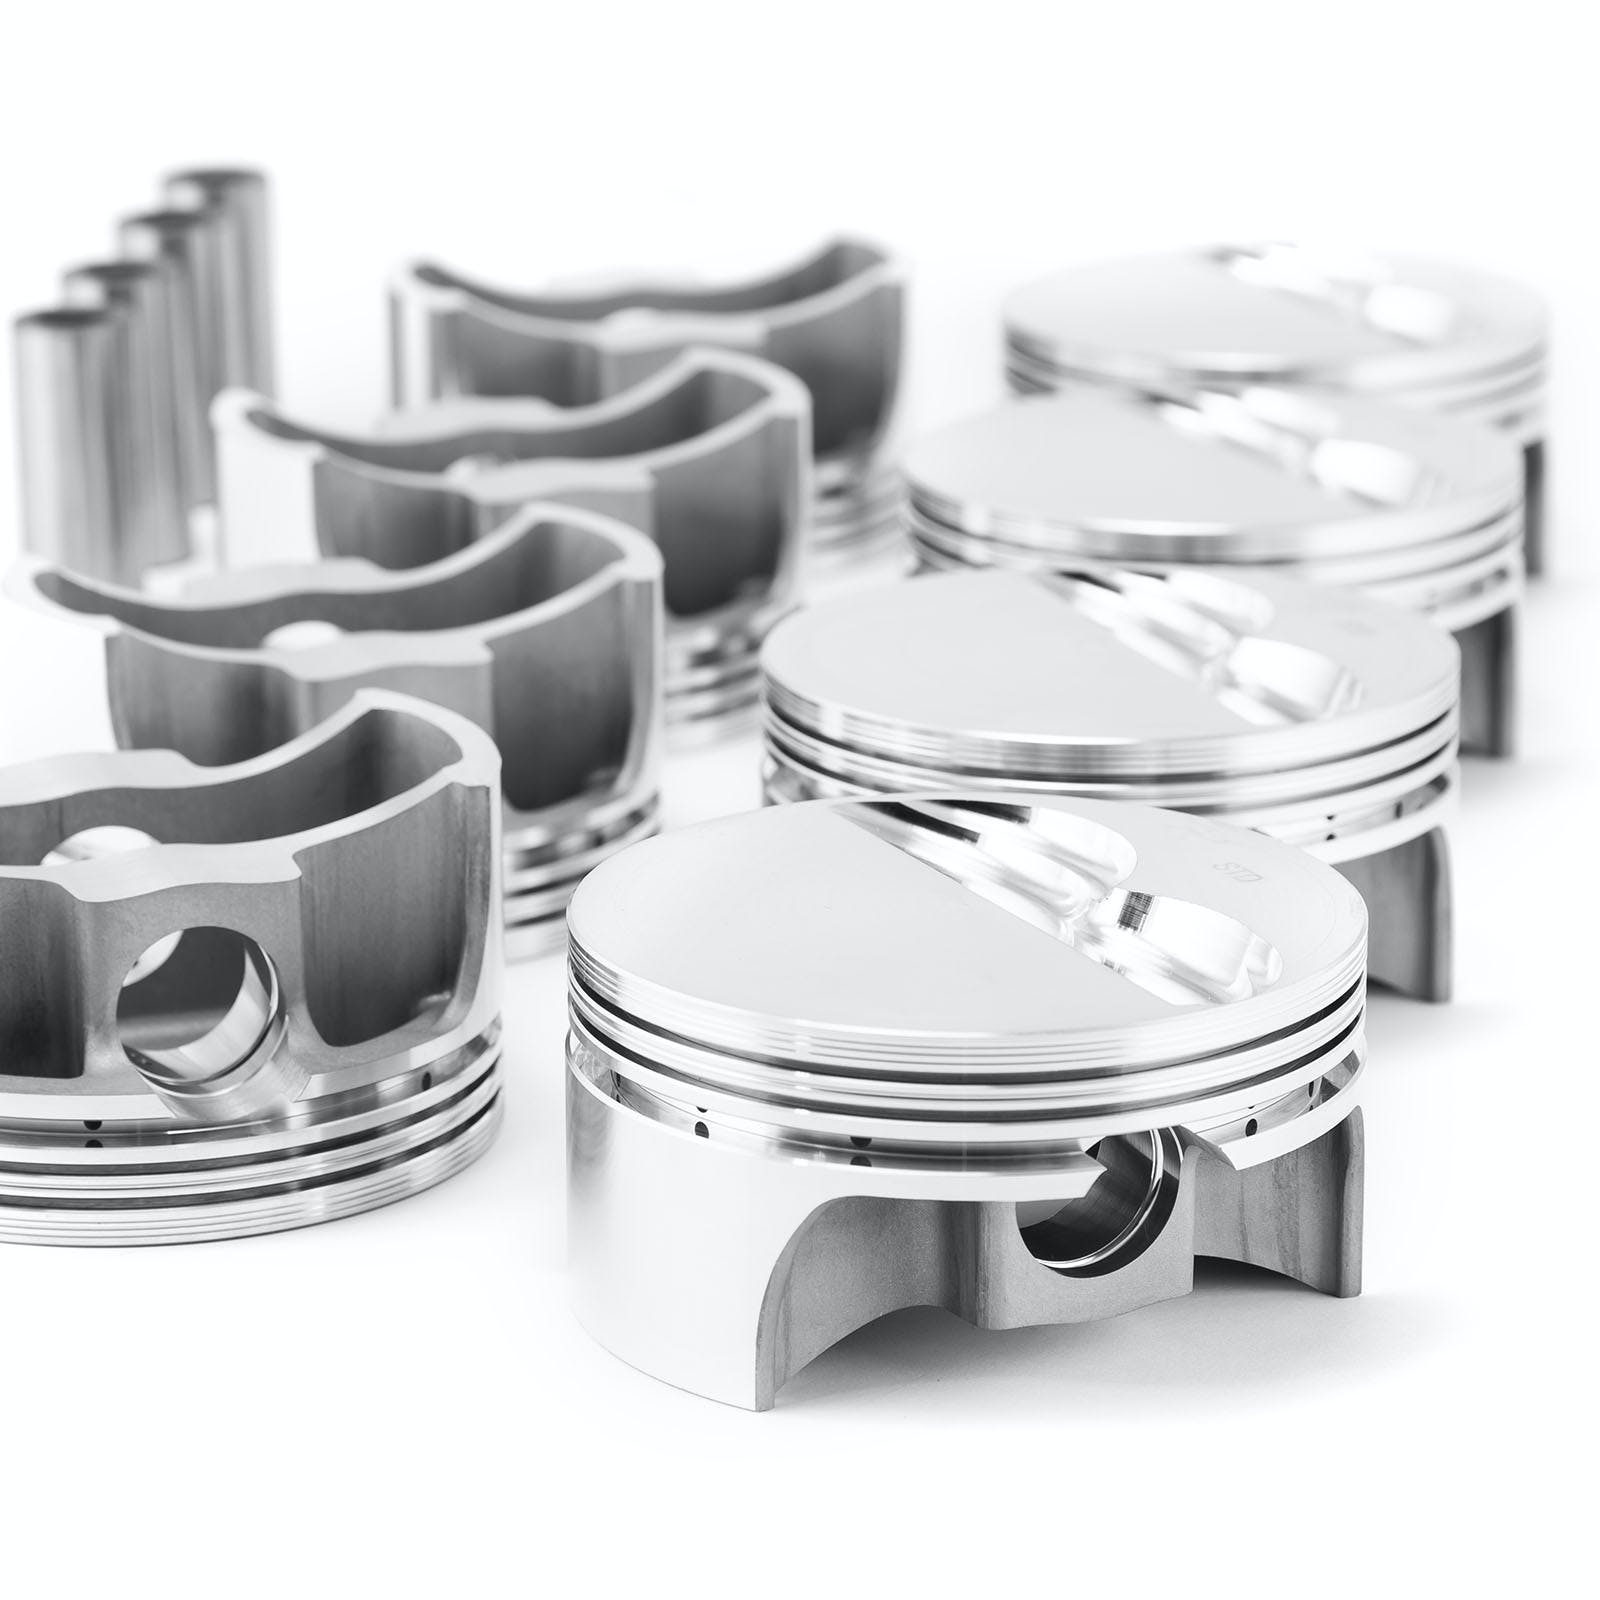 Speedmaster PCE305.1123 4.005 Bore 1.065 .927 Flat Top Forged Pistons